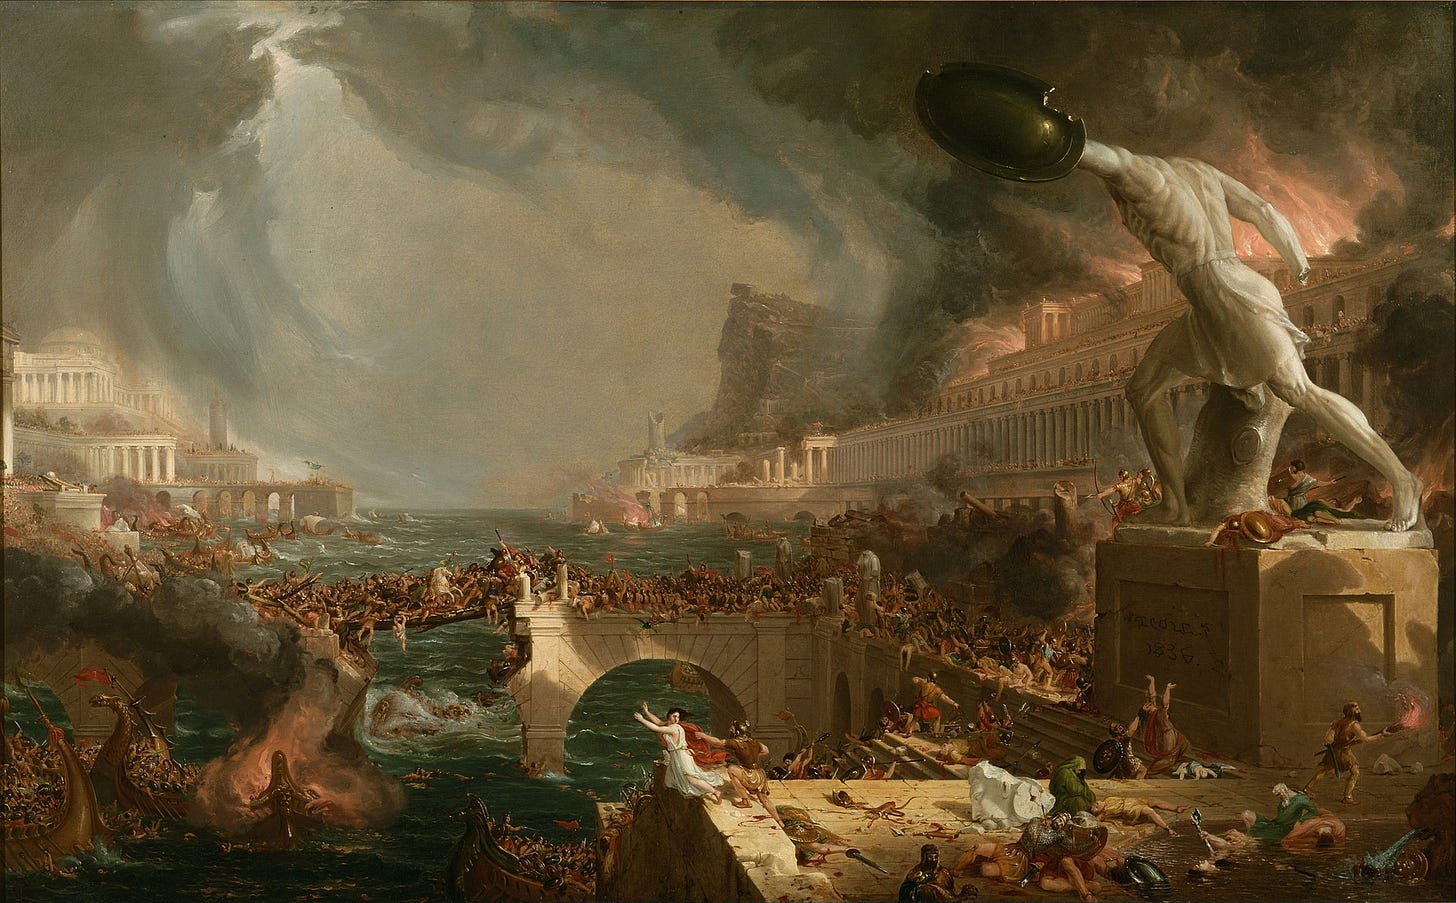 Destruction, from The Course of Empire by Thomas Cole (1836)